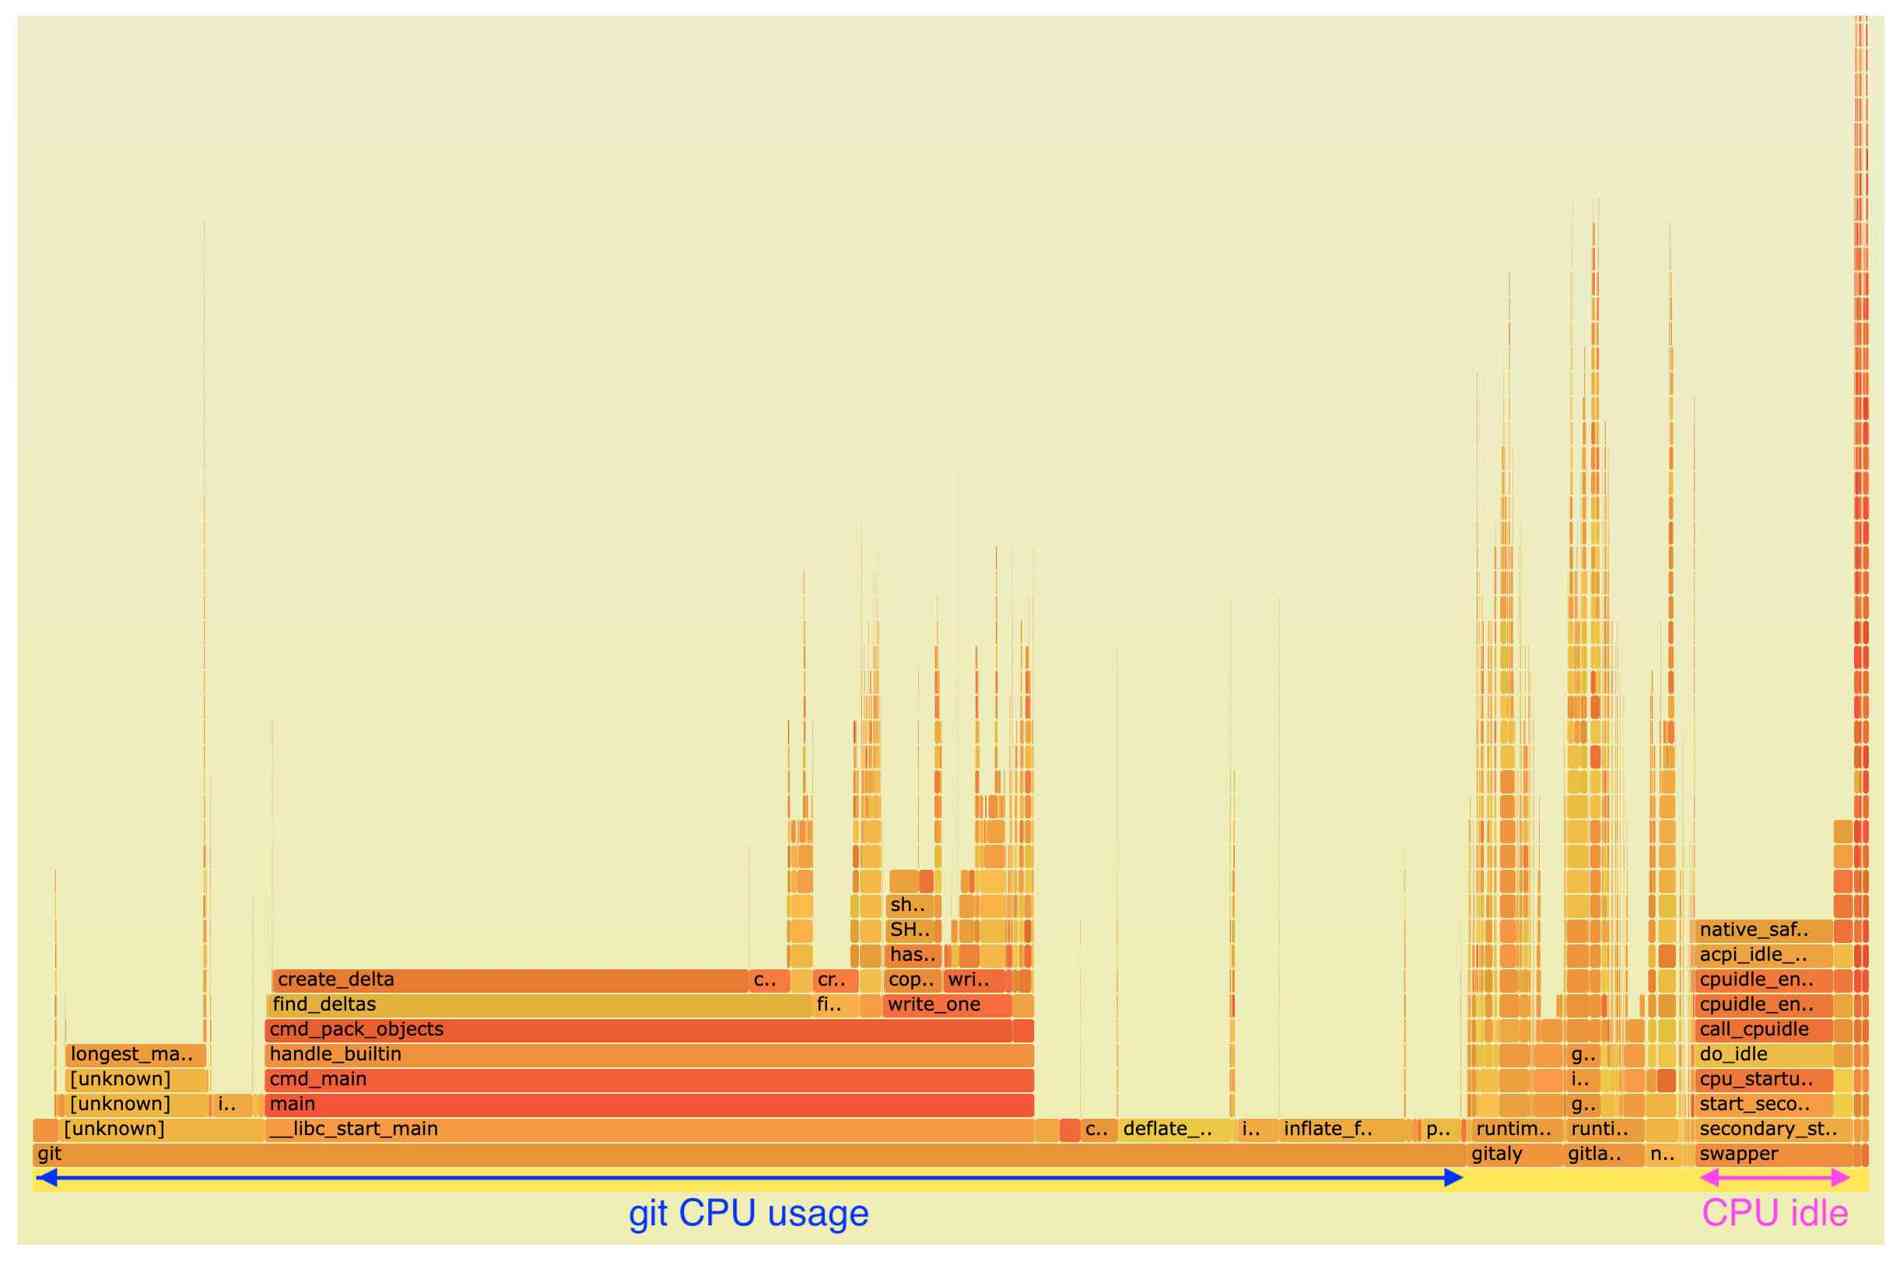 Flamegraph of GitLab 13.7 performance